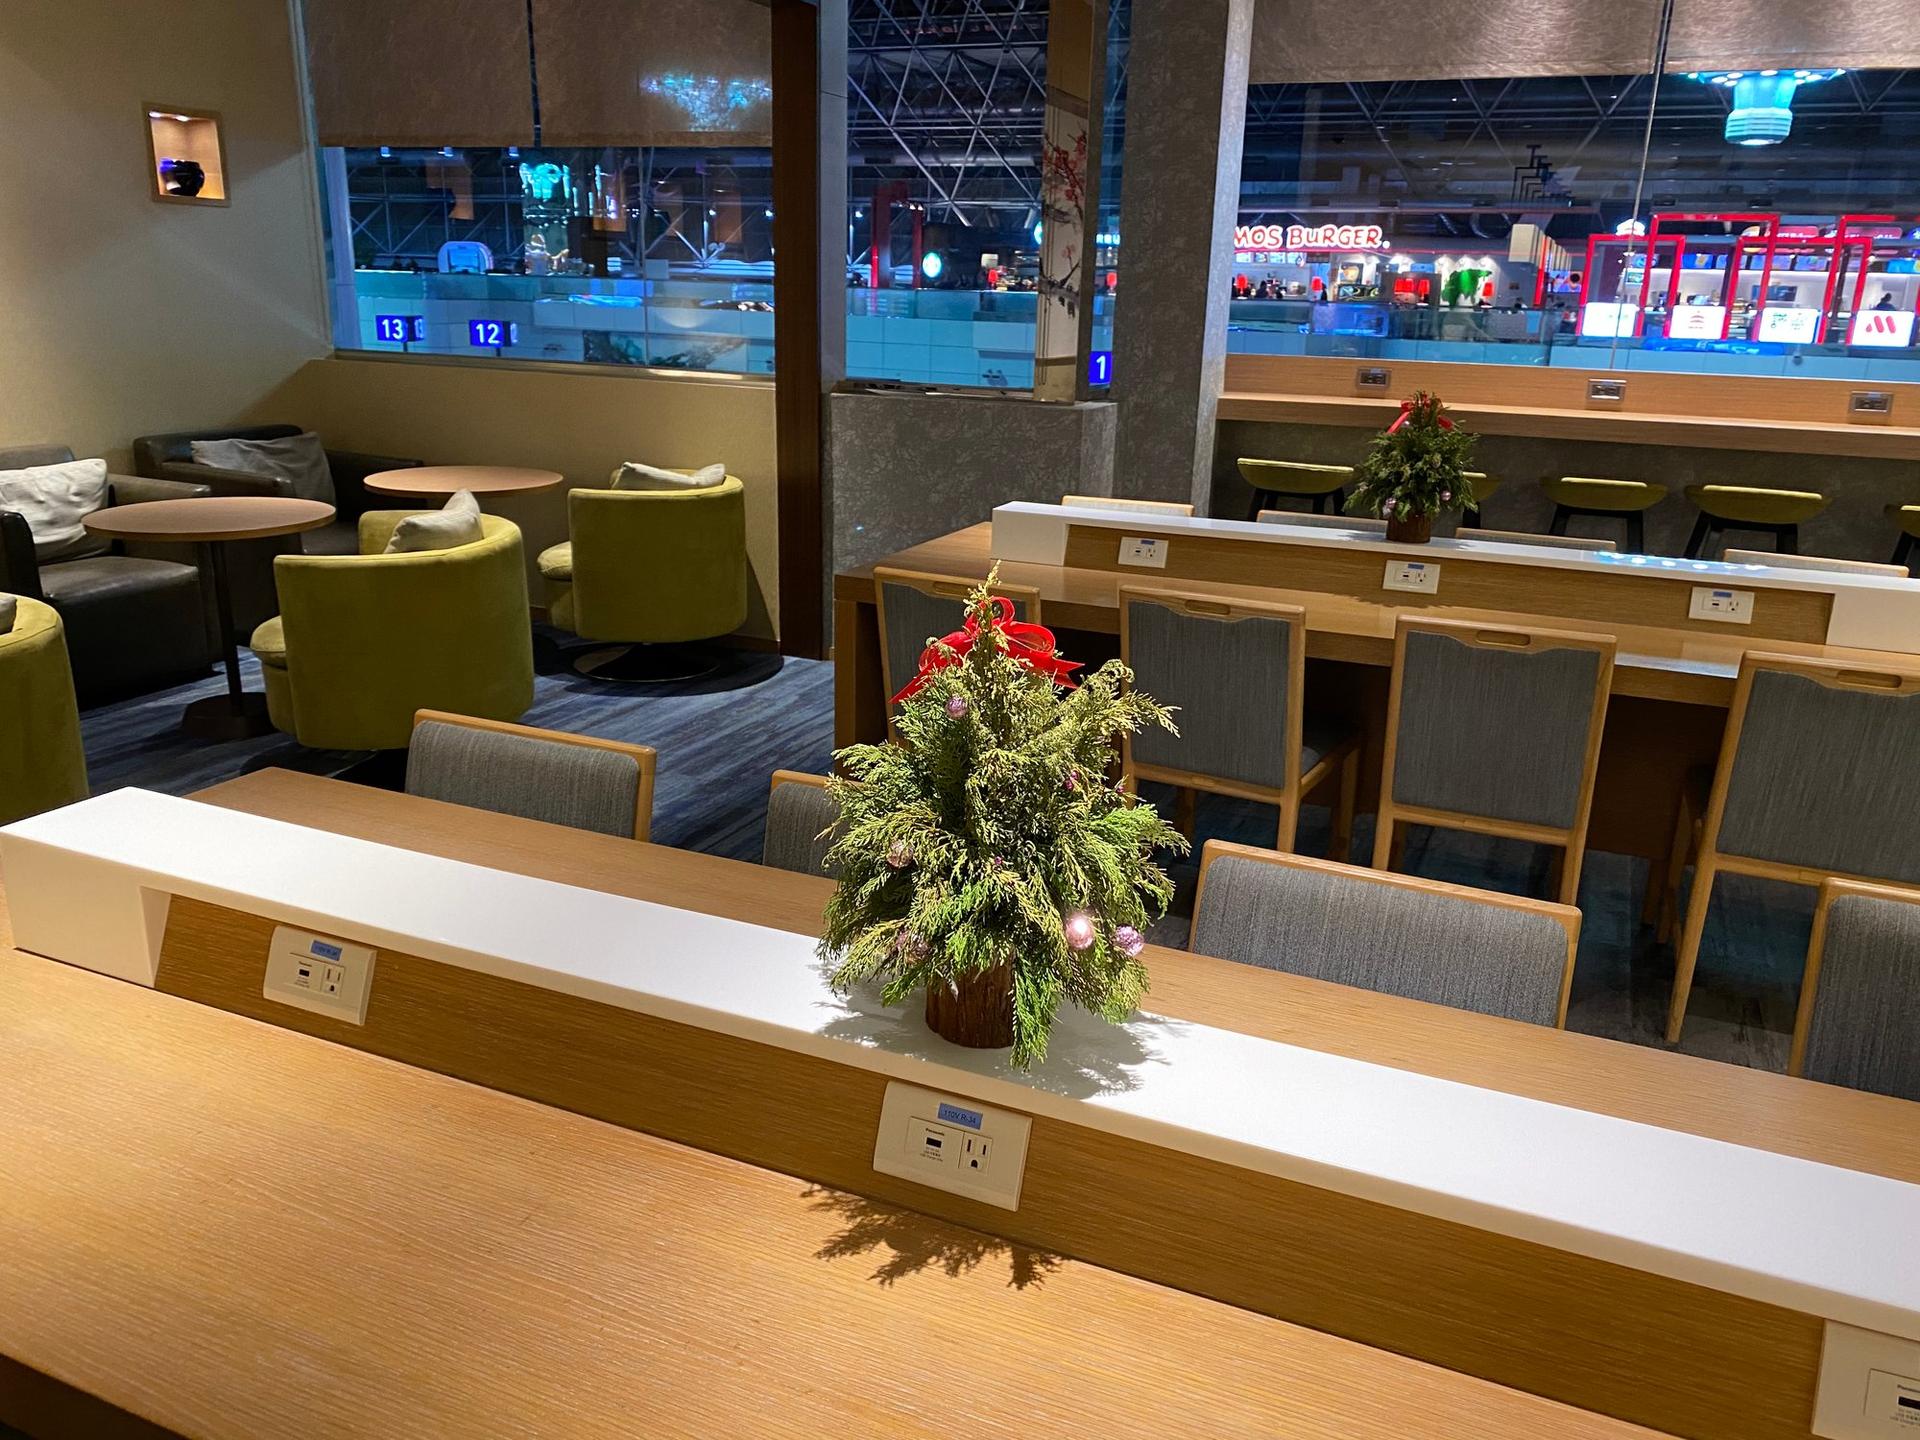 China Airlines Supreme Lounge (V3) image 2 of 21